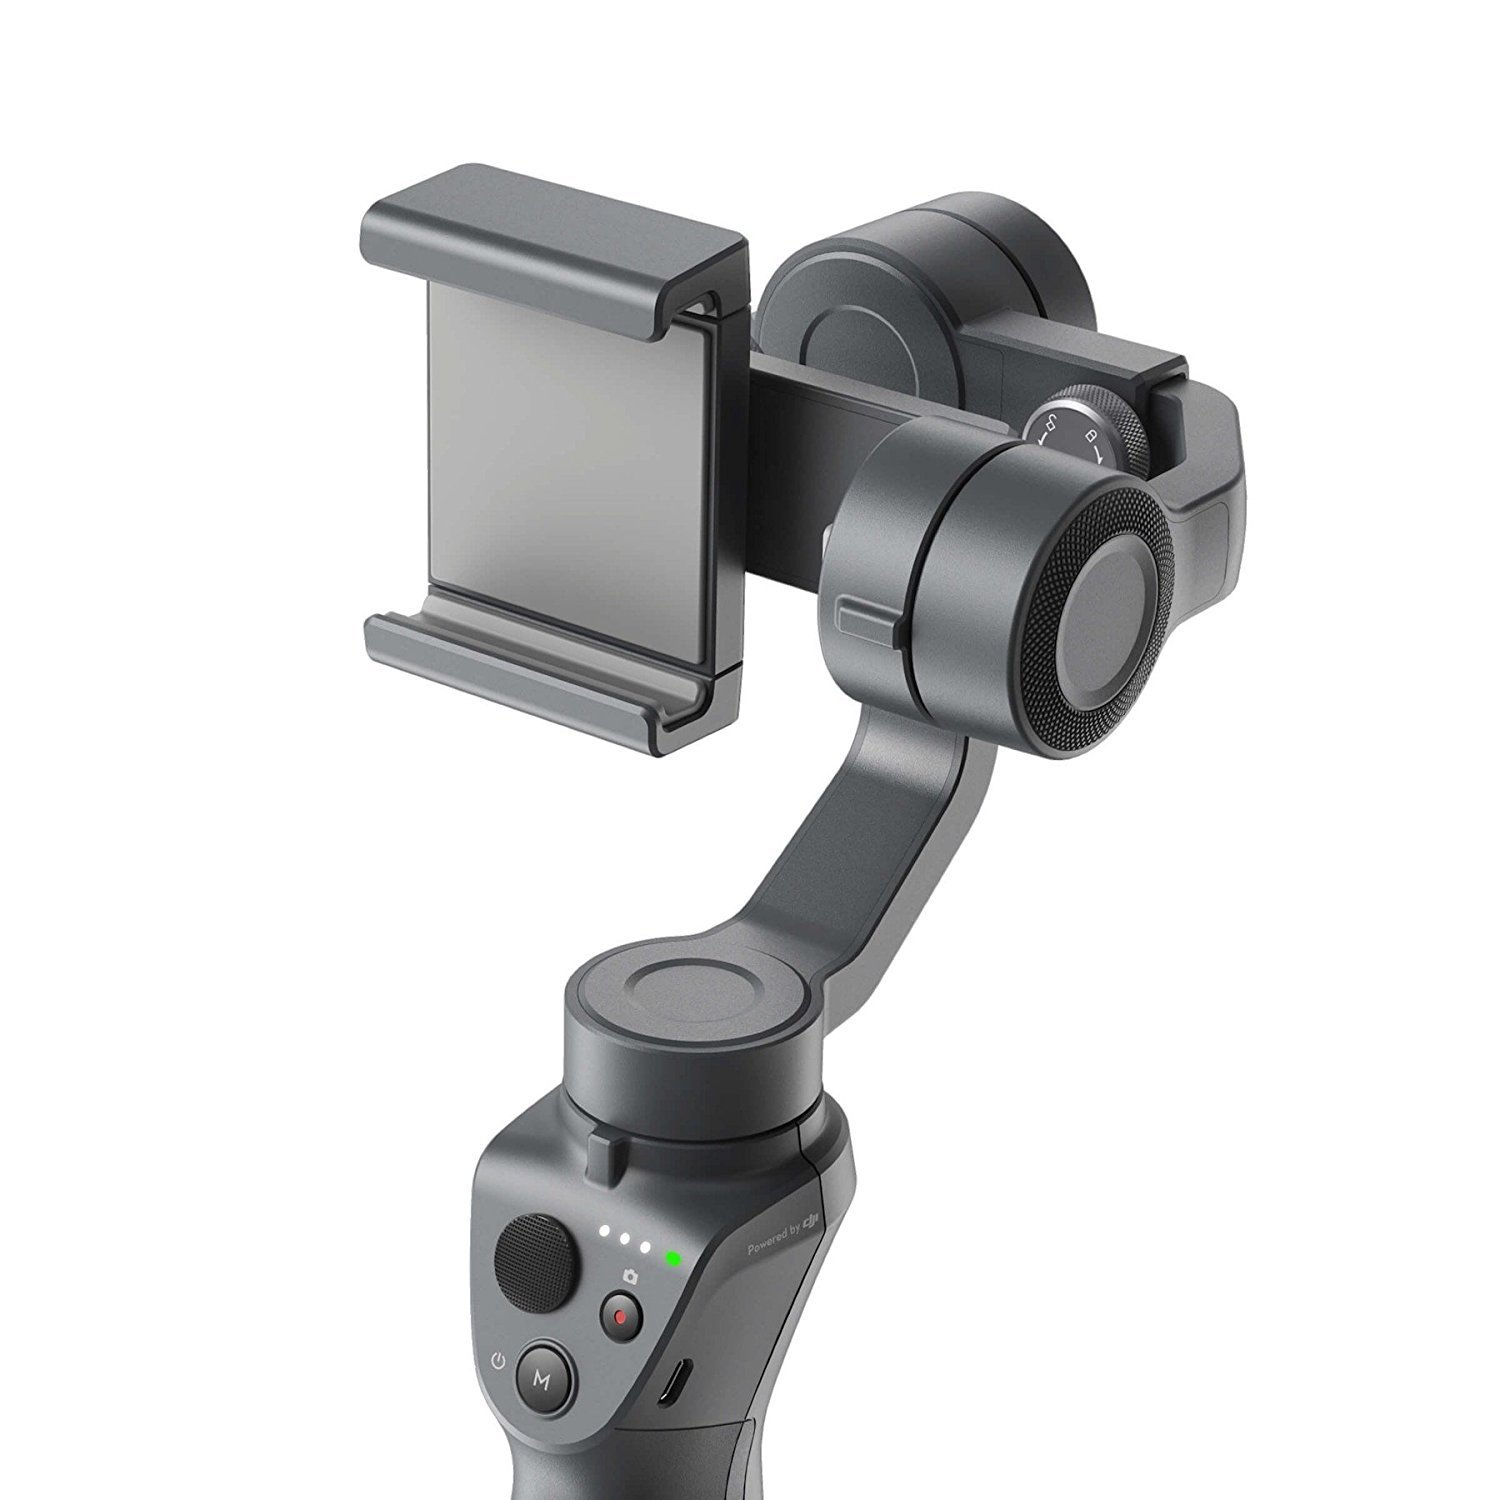 DJI Osmo Mobile 2 Images